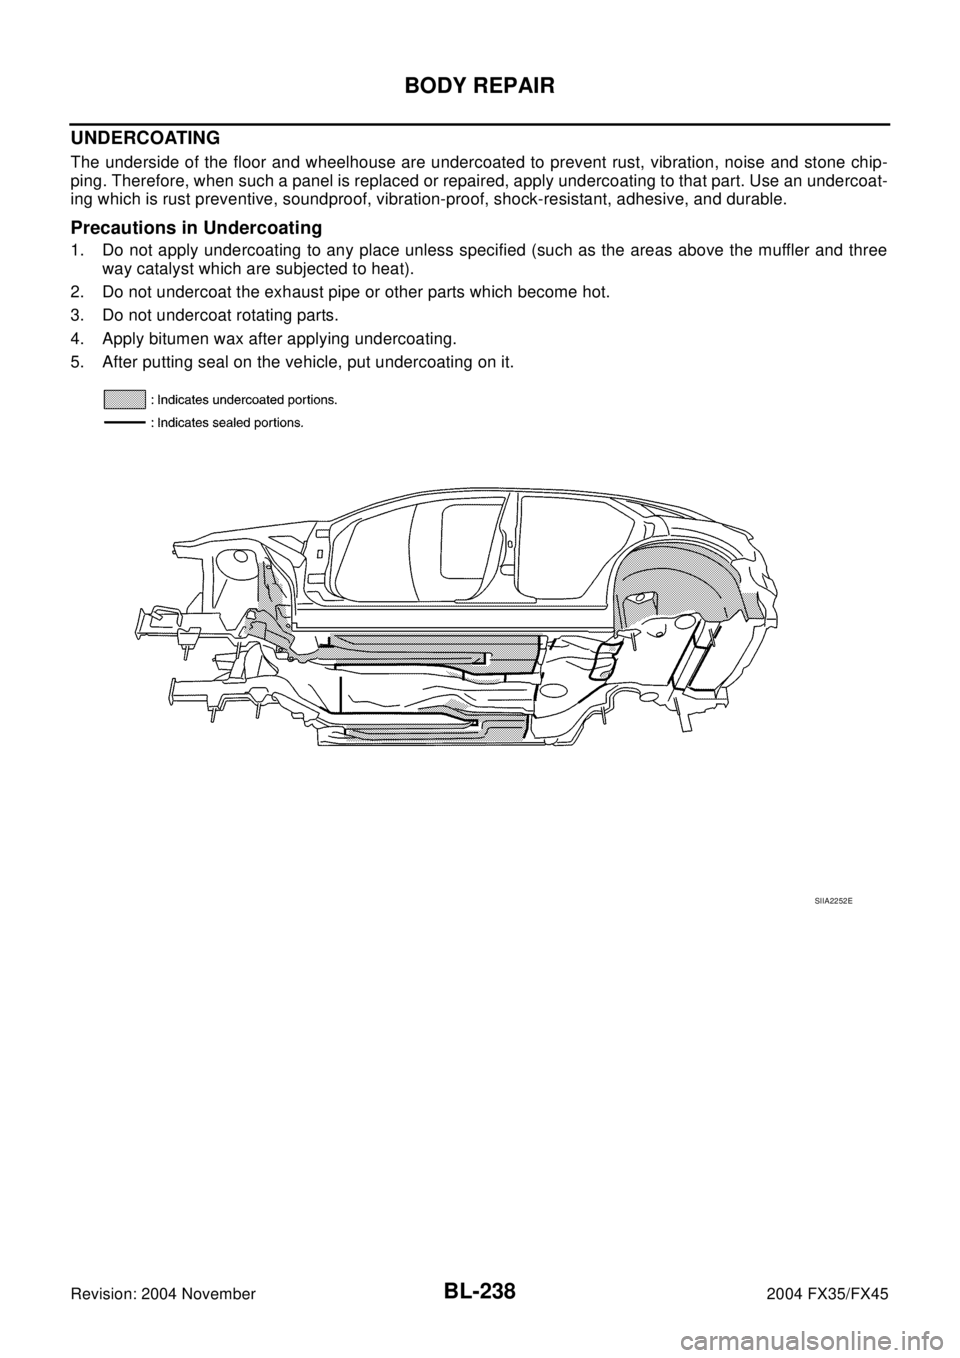 INFINITI FX35 2004  Service Manual BL-238
BODY REPAIR
Revision: 2004 November2004 FX35/FX45
UNDERCOATING
The underside of the floor and wheelhouse are undercoated to prevent rust, vibration, noise and stone chip-
ping. Therefore, when 